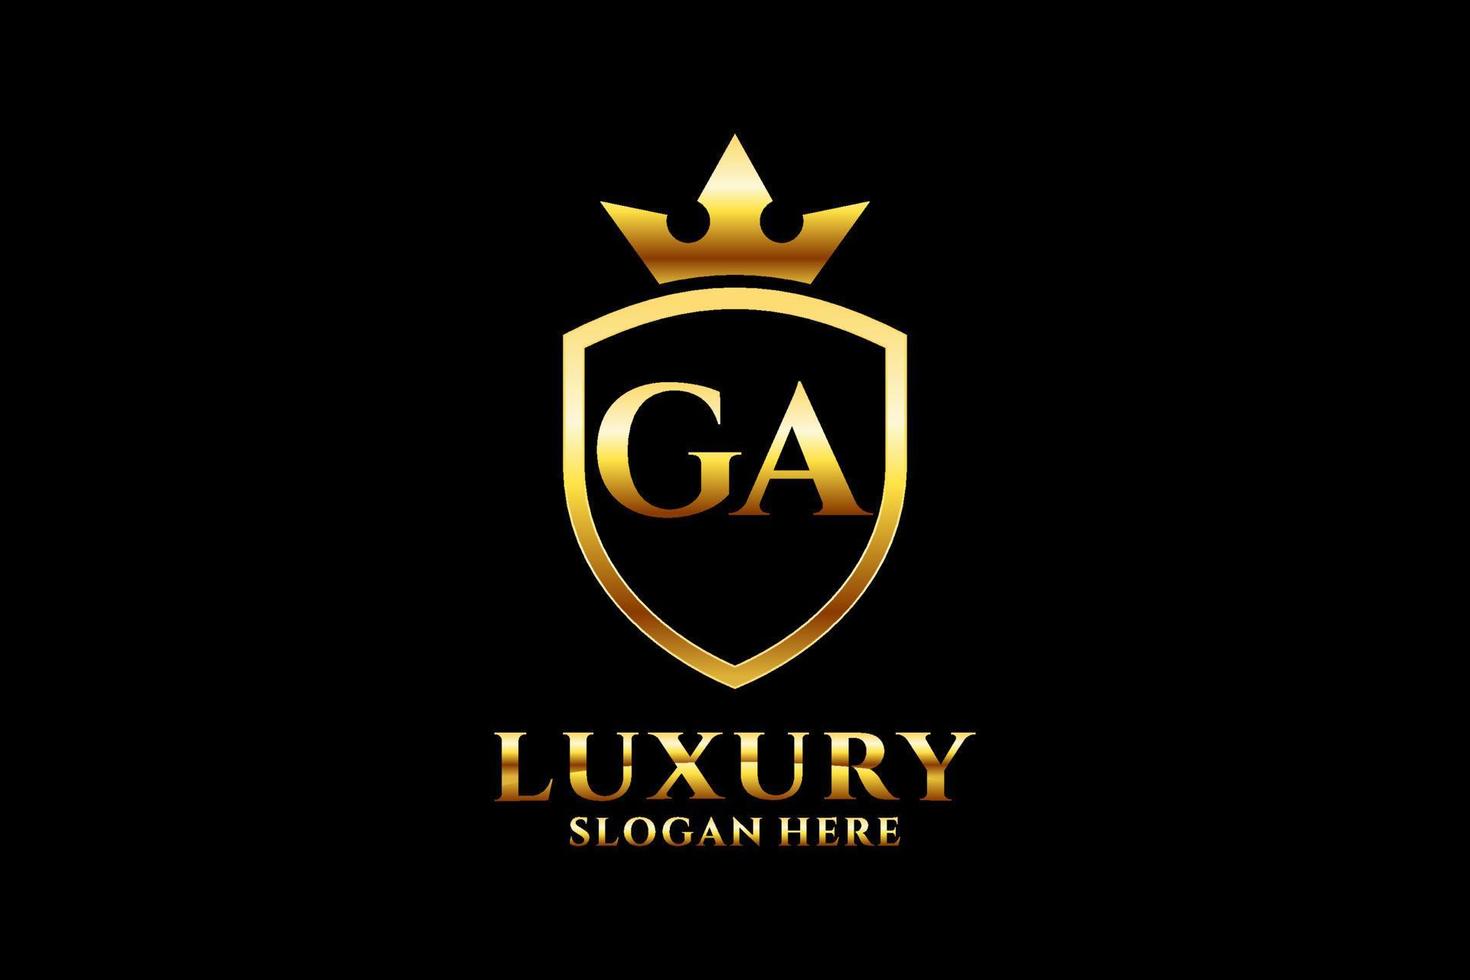 initial GA elegant luxury monogram logo or badge template with scrolls and royal crown - perfect for luxurious branding projects vector